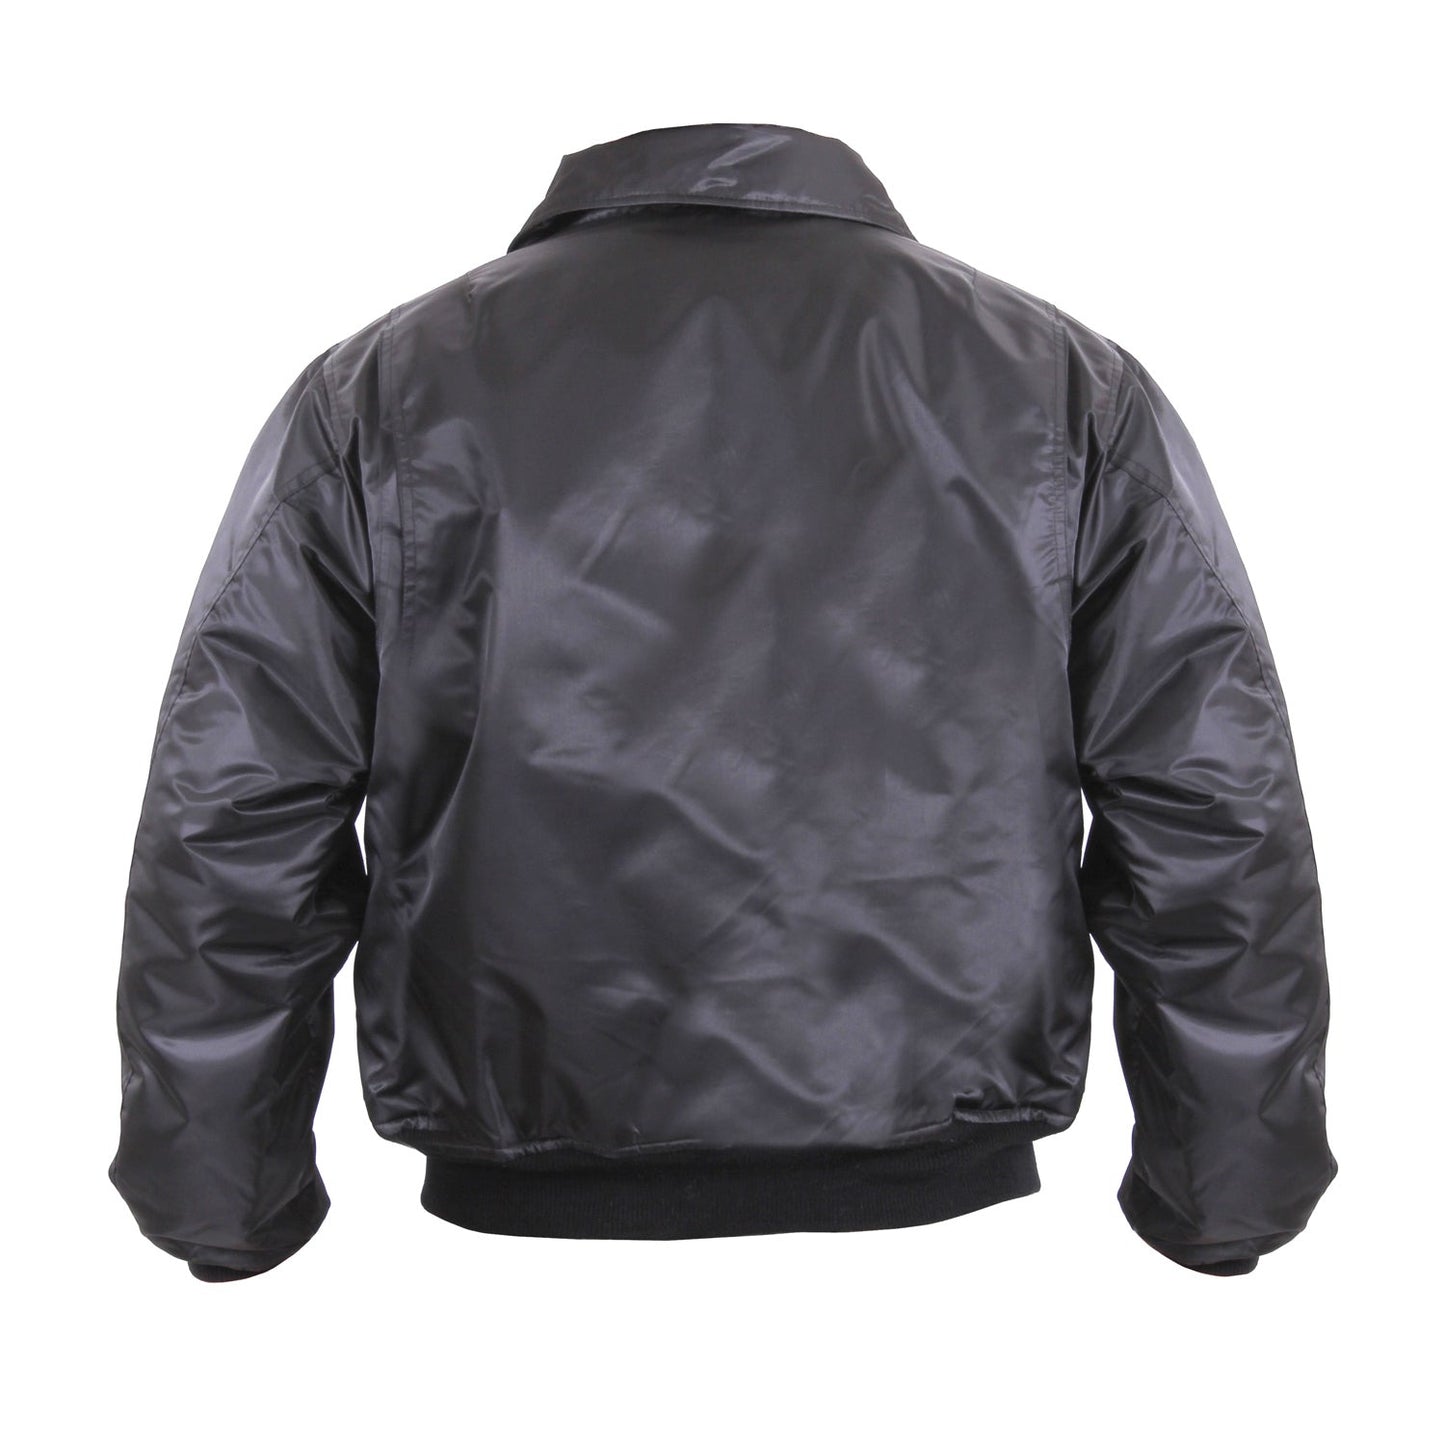 Rothco's CWU-45P (Cold Weather Uniform) Flight Jacket is designed with a water repelling nylon outer shell and a matching quilted polyester liner for optimal warmth; making this the ideal cold weather jacket you can own.